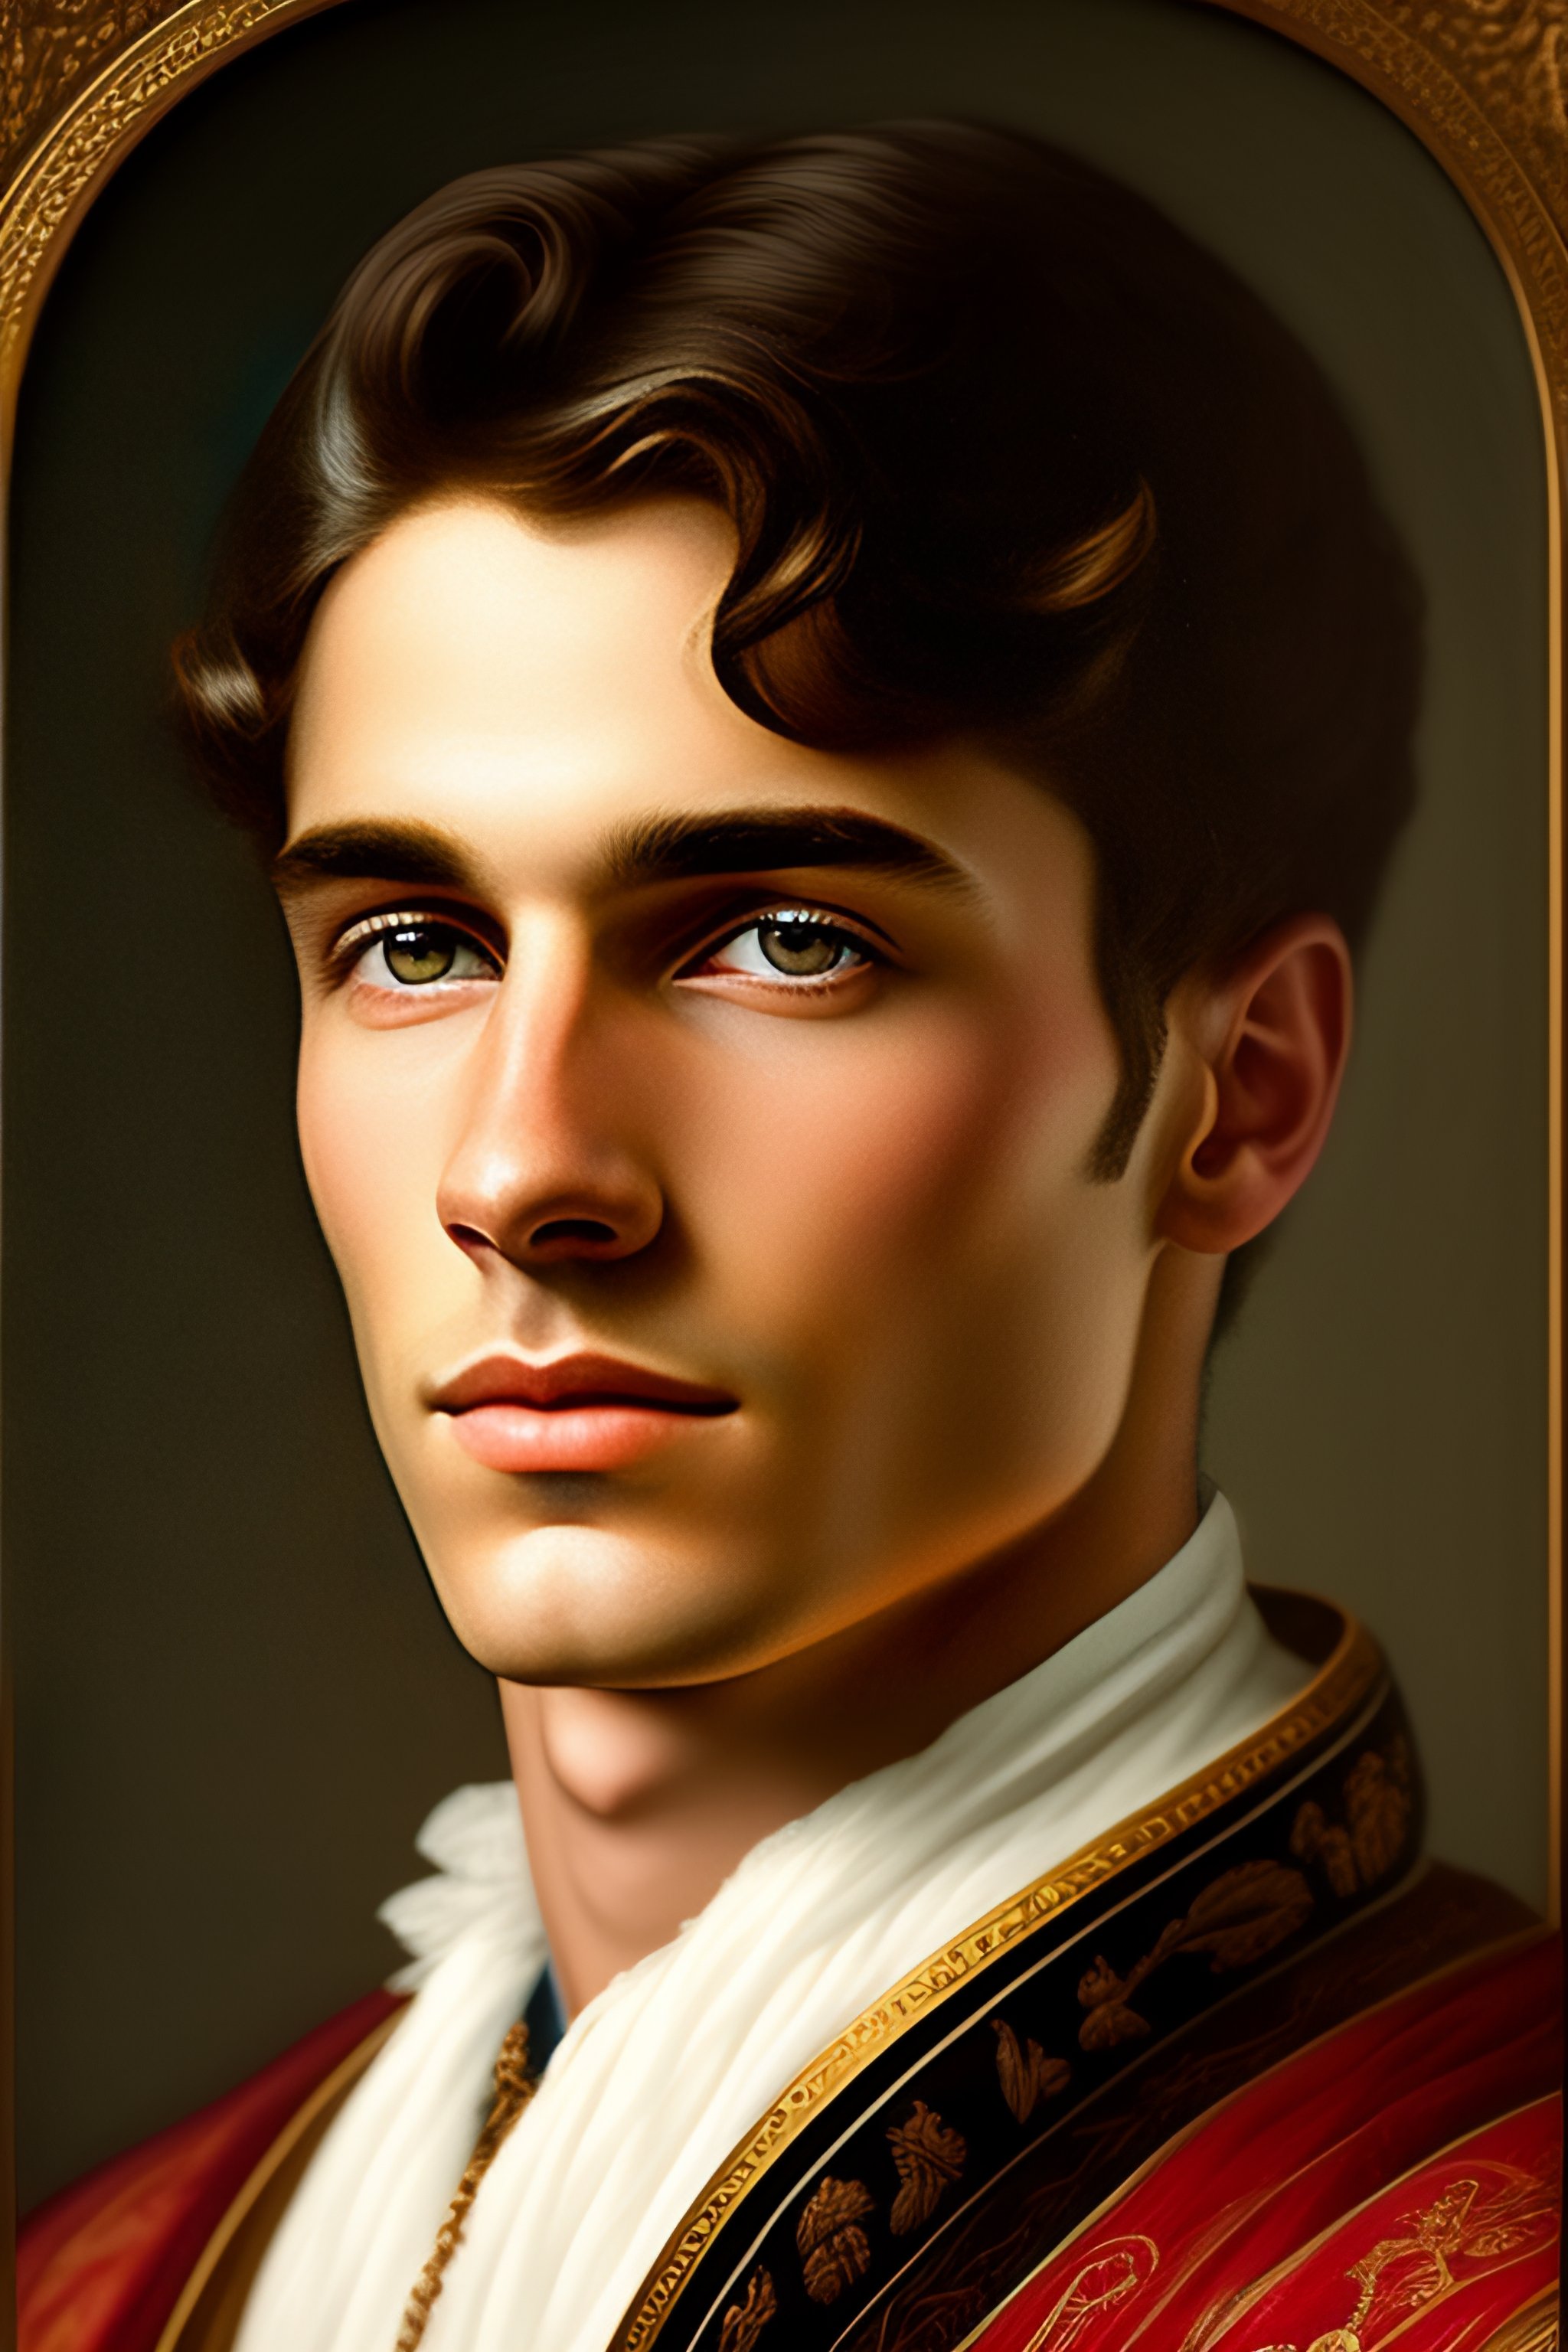 Lexica - A portrait of a beautiful young male wearing an alexander